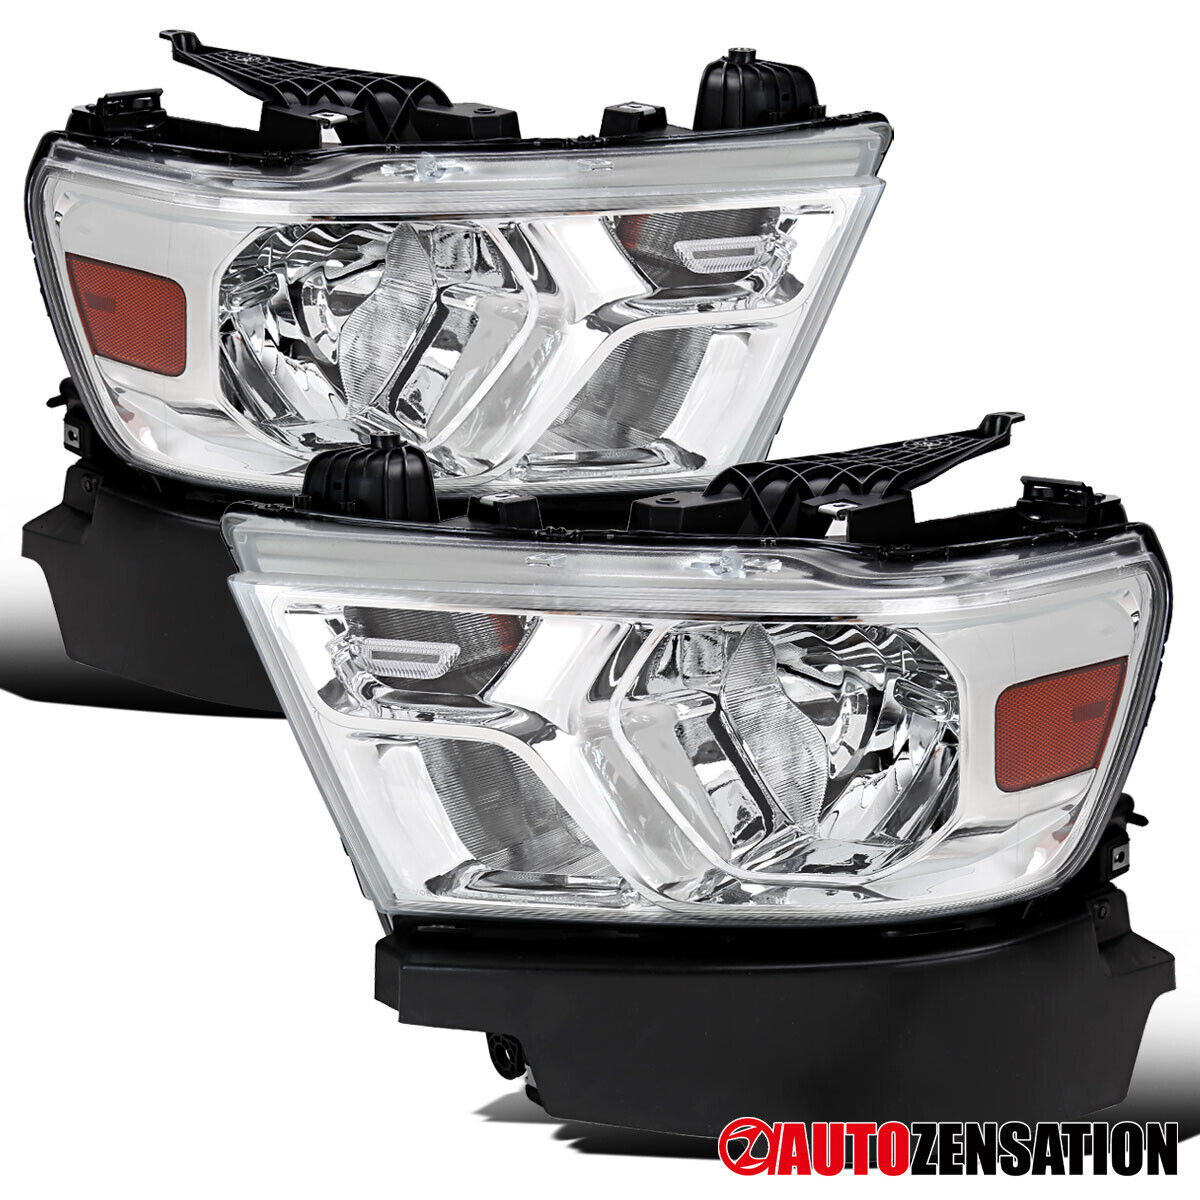 Fit 2019 2020 2021 Dodge Ram 1500 Headlights Halogen Lamps Assembly Left+Right